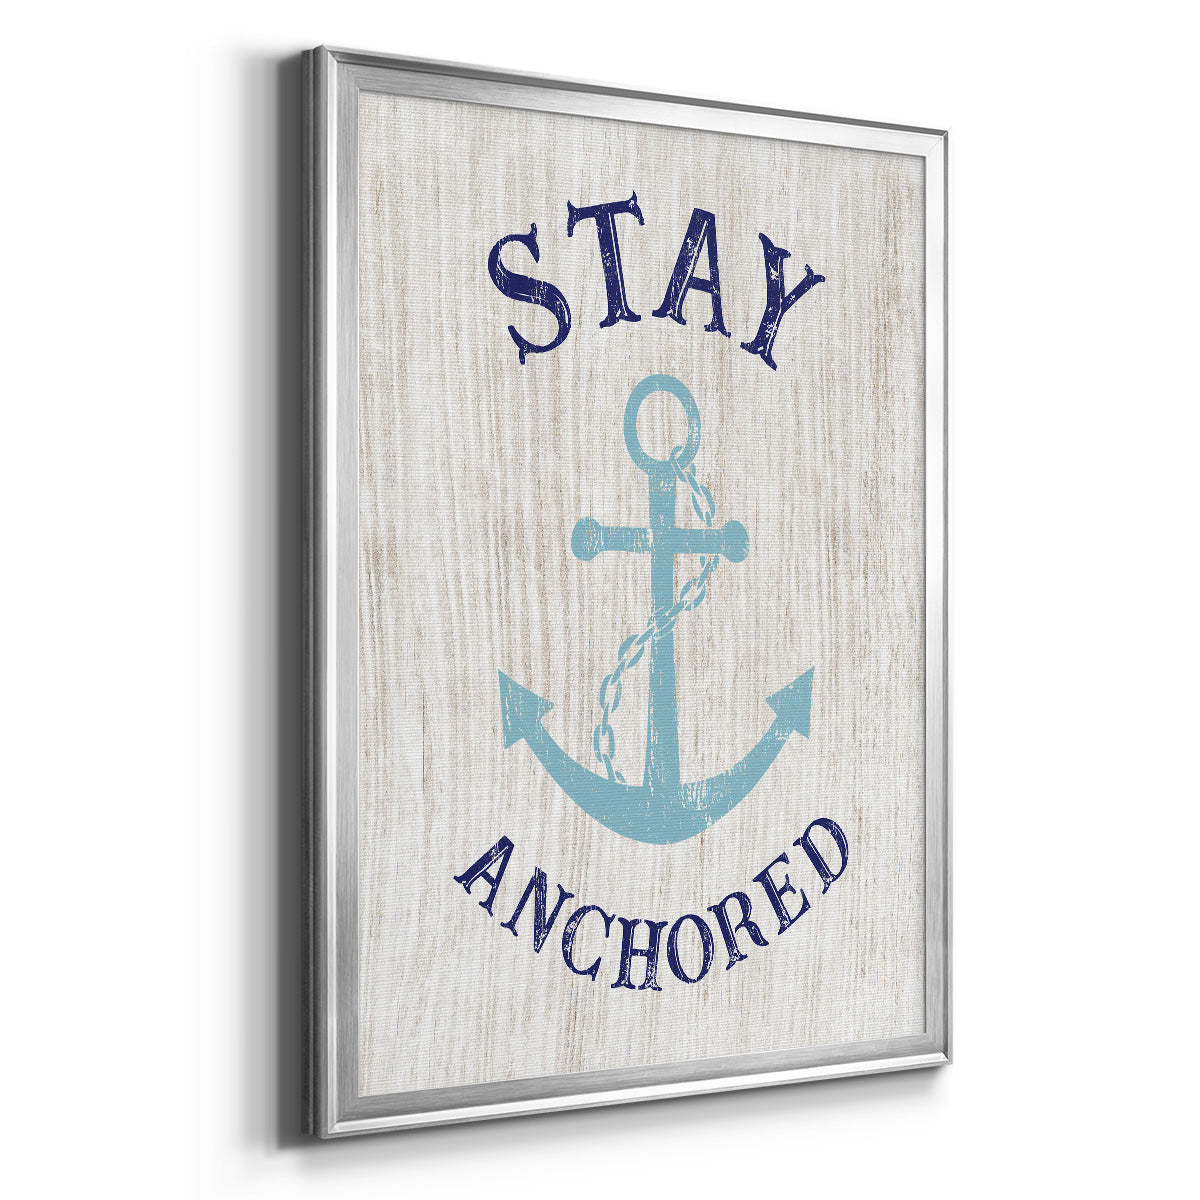 Stay Anchored Premium Framed Print - Ready to Hang